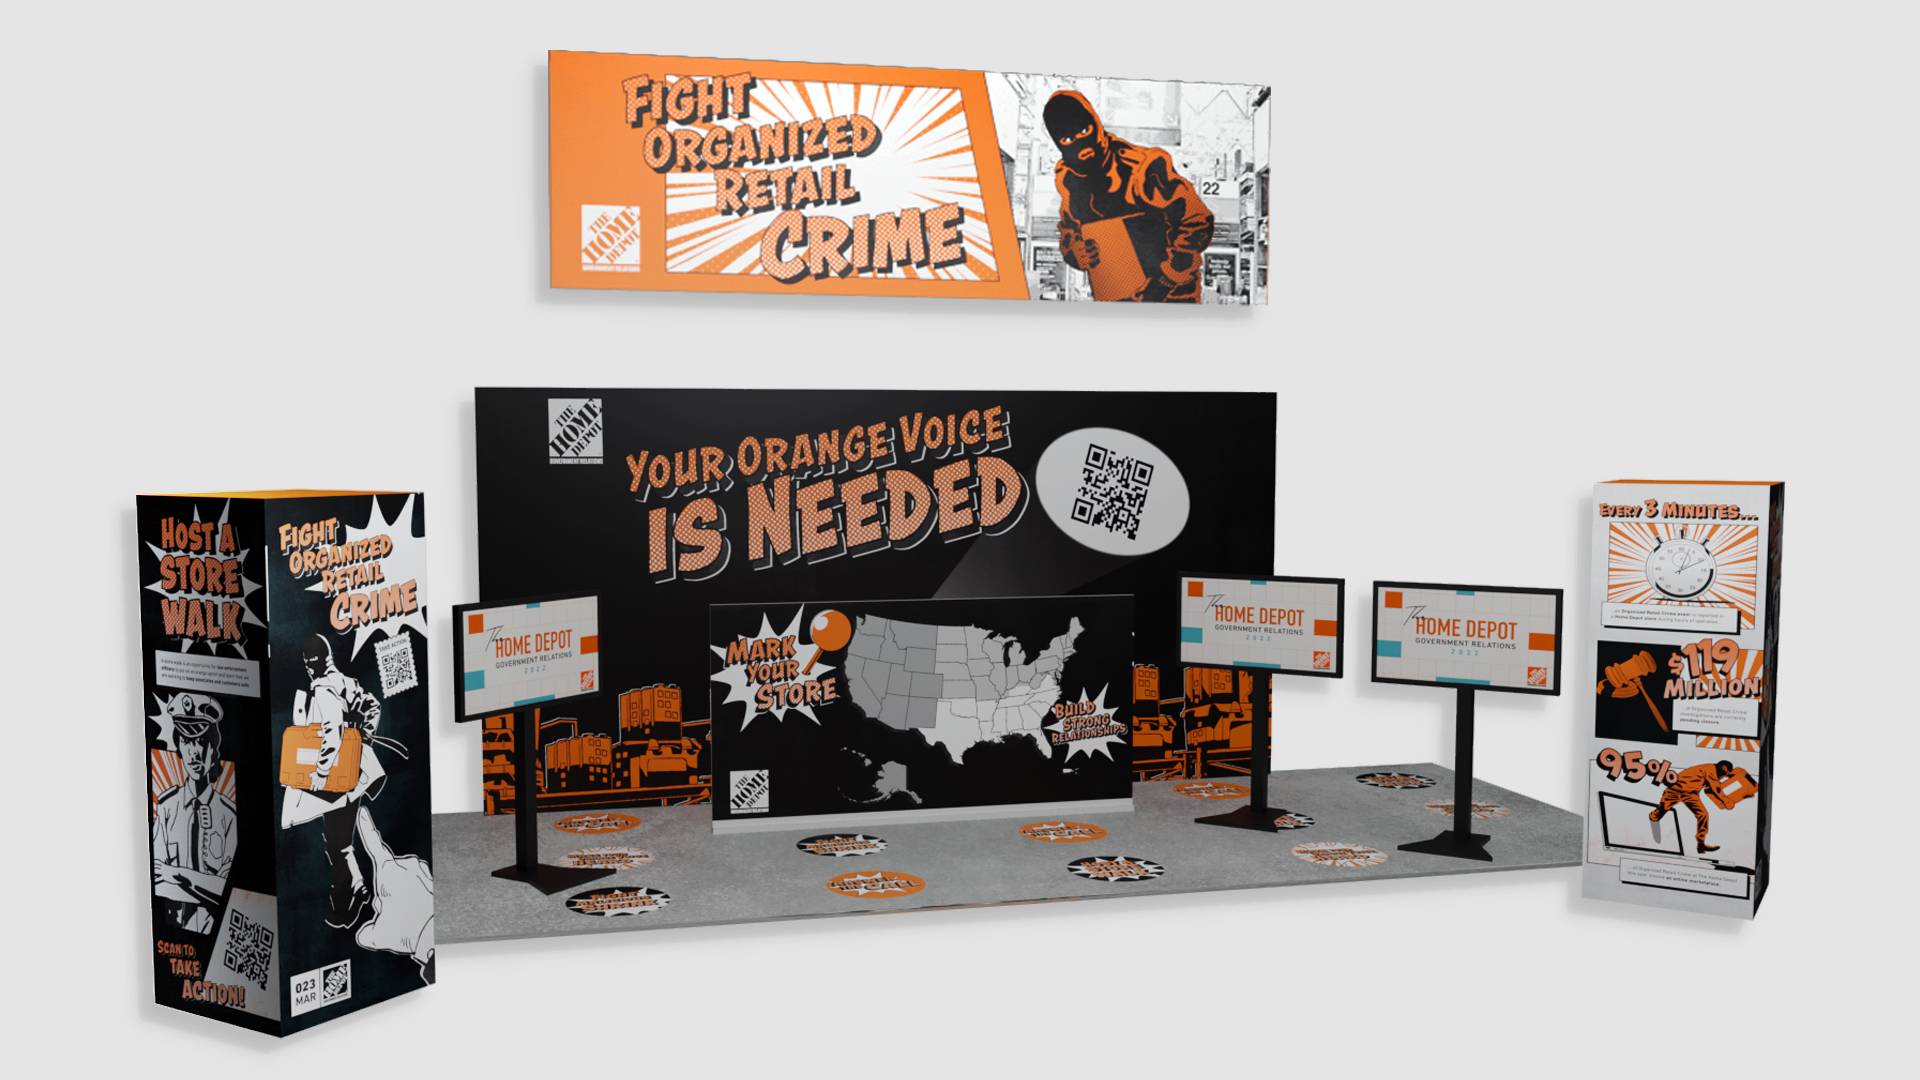 A display booth from Home Depot advocating against organized retail crime. The setup features bold text, a map, QR codes, images of a person in an orange apron, and multiple signs. Slogans include "Your orange voice is needed" and "Fight Organized Retail Crime.